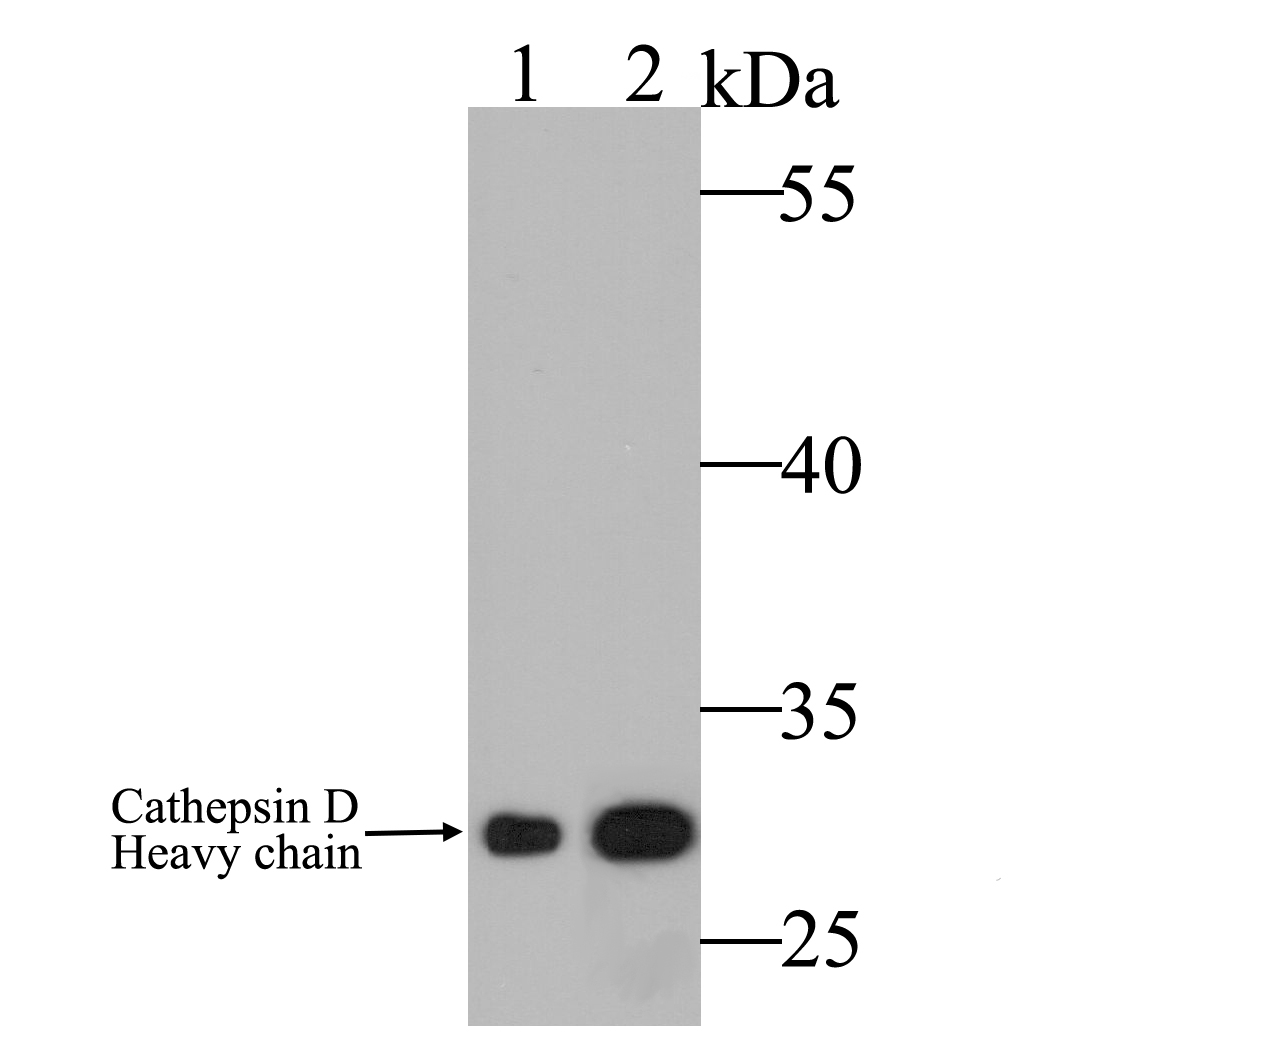 Western blot analysis of Cathepsin D on different lysates. Proteins were transferred to a PVDF membrane and blocked with 5% BSA in PBS for 1 hour at room temperature. The primary antibody was used at a 1:500 dilution in 5% BSA at room temperature for 2 hours. Goat Anti-Mouse IgG - HRP Secondary Antibody (HA1006) at 1:5,000 dilution was used for 1 hour at room temperature.<br />
Positive control: <br />
Lane 1: SK-BR-3 cell lysate<br />
Lane 2: MCF-7 cell lysate